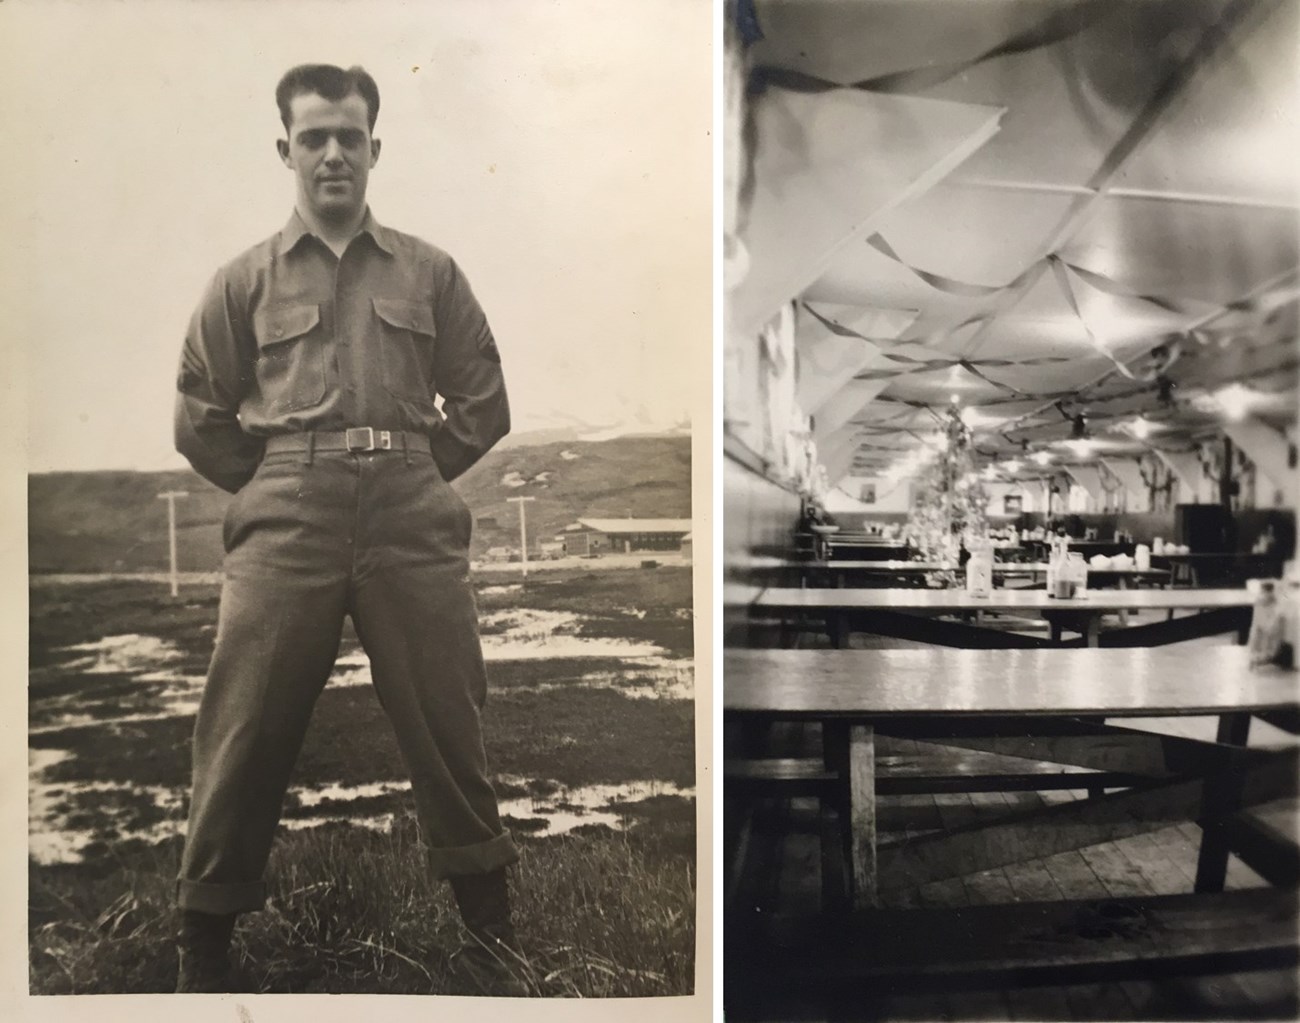 Two photos: man in basic uniform outside, and long row of picnic tables inside a minimally decorated building.